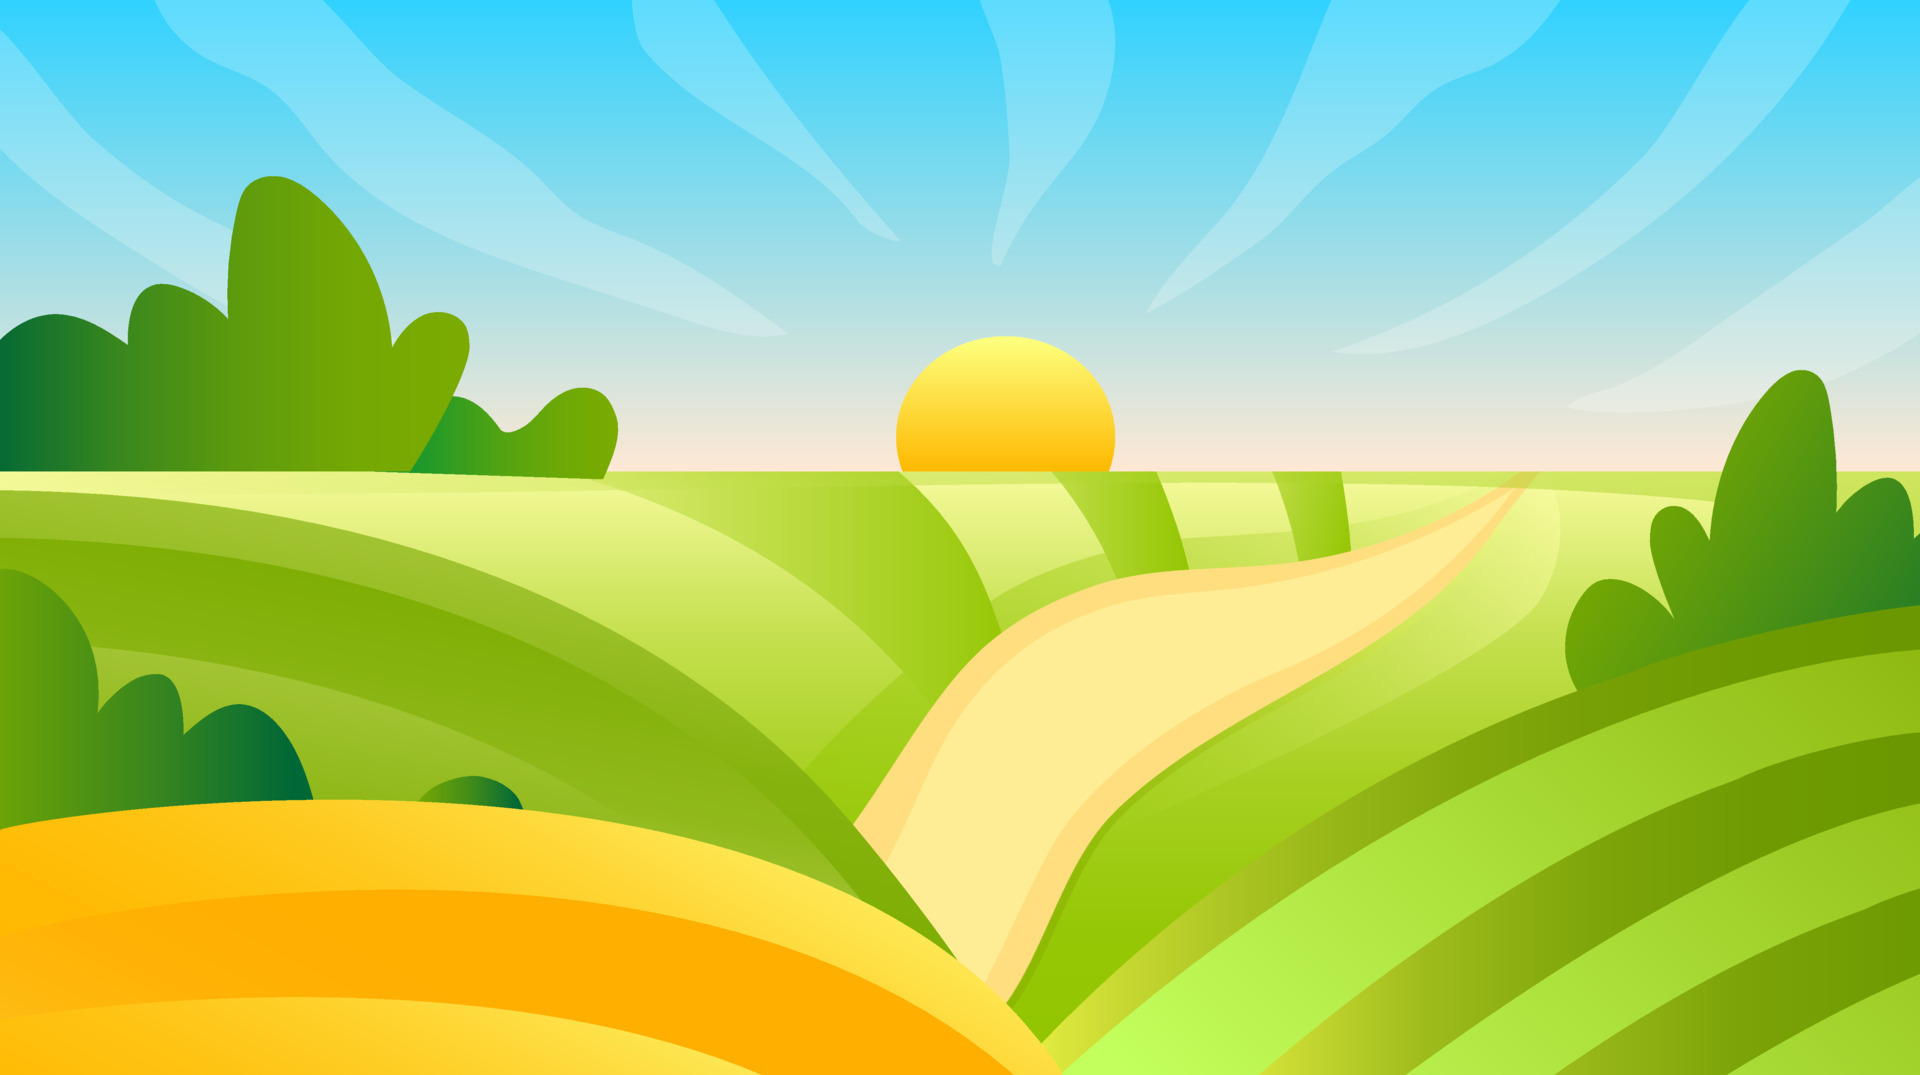 Rural landscape vector illustration. Farm agriculture colorful concept. Horizon view of field, hills, valley. Sunny day summer weather. Sunrise green meadow outdoor wallpaper. Countryside road scene